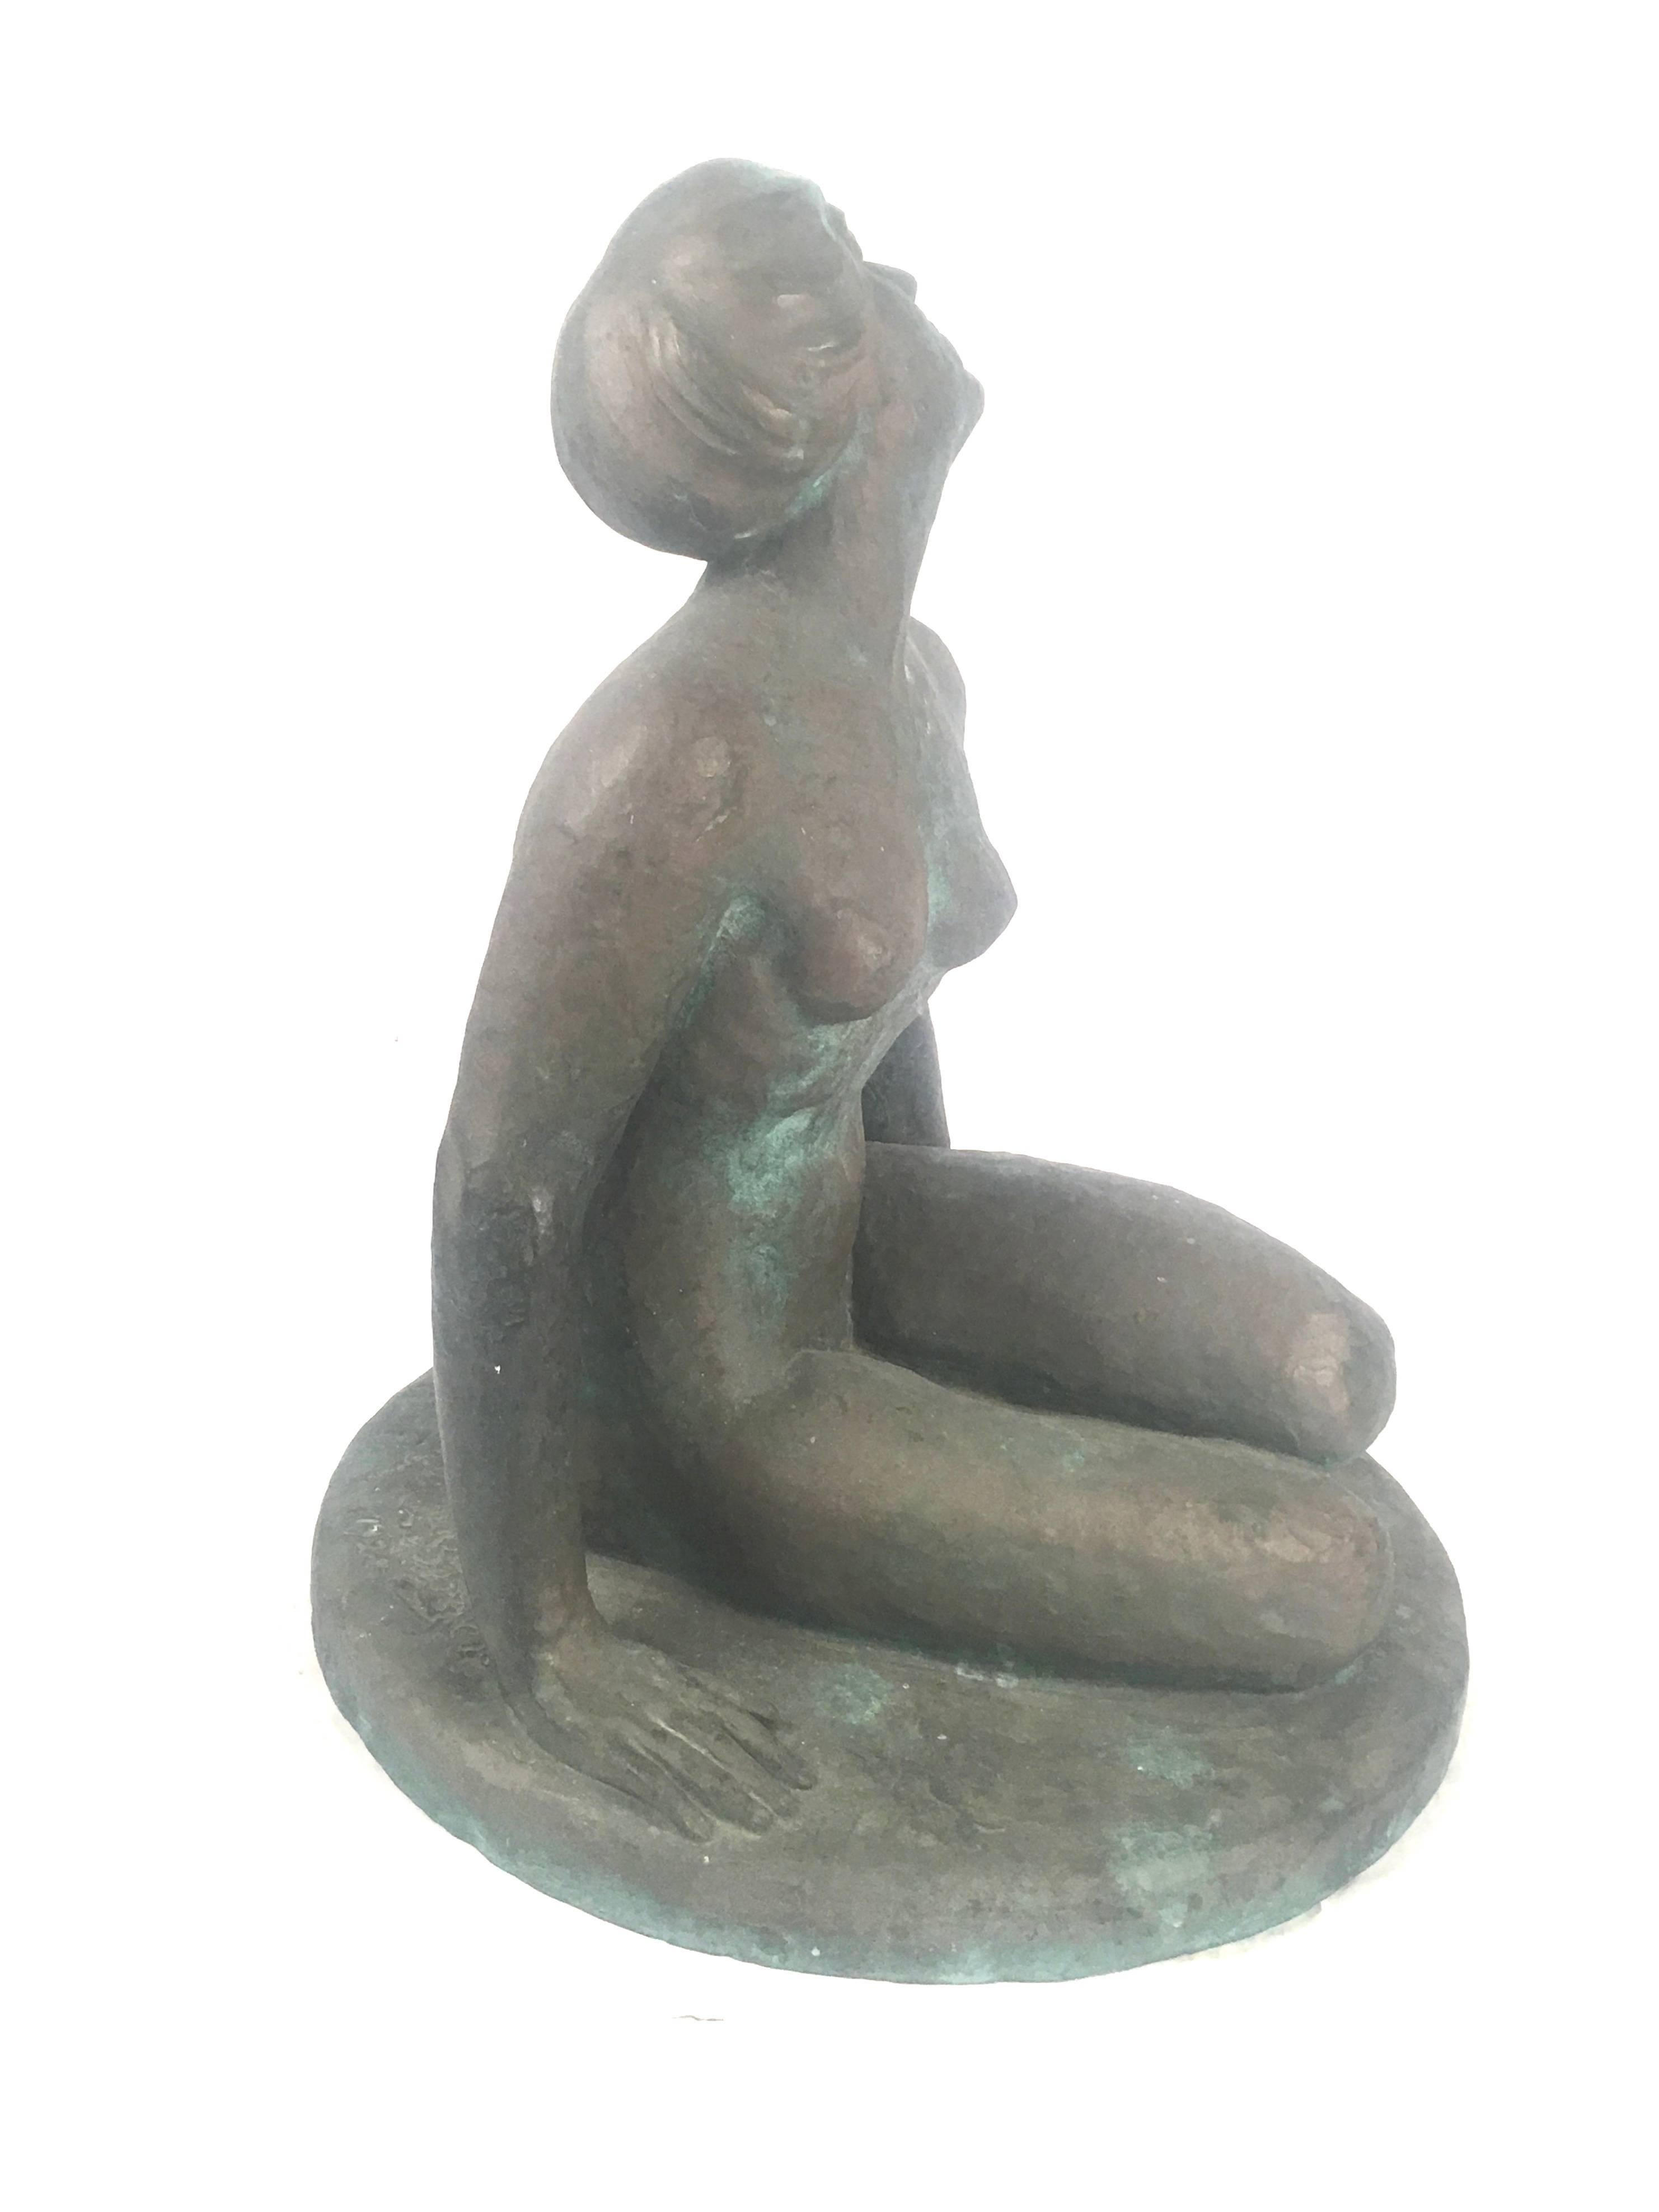 An expressive bronze sculpture of a seated nude woman by Leo bergere (Swiss, 1885-1983), her head tilted and looking upward, her legs crossed, leaning on her right arm with her left wrist resting on her ankle, on a circular base. Signed and dated on